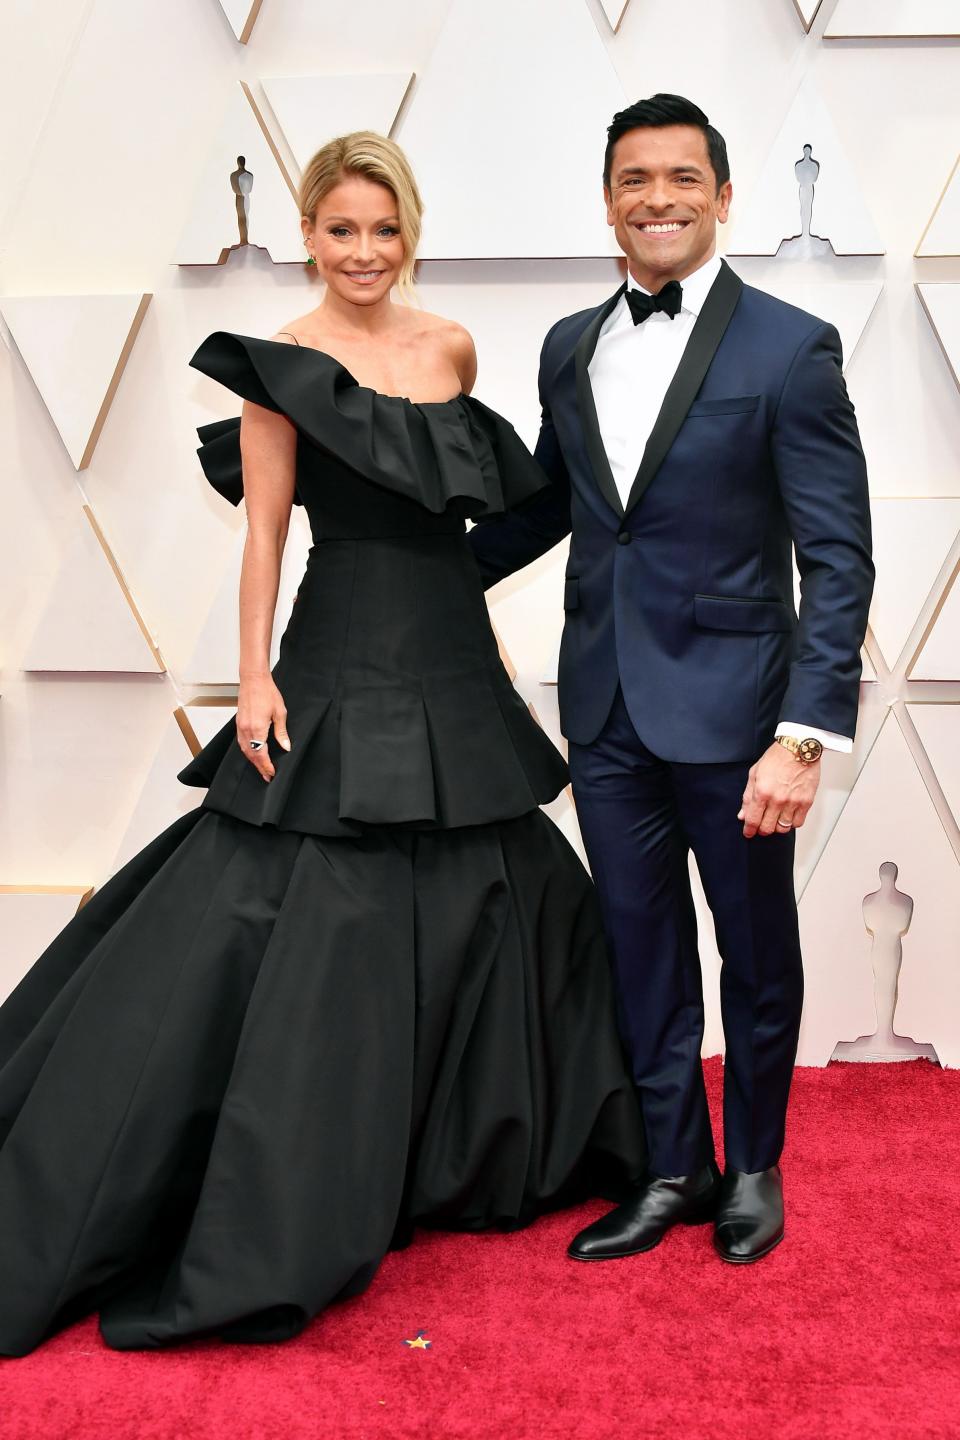 HOLLYWOOD, CALIFORNIA - FEBRUARY 09: (L-R) Kelly Ripa and  Mark Consuelos attend the 92nd Annual Academy Awards at Hollywood and Highland on February 09, 2020 in Hollywood, California. (Photo by Amy Sussman/Getty Images)